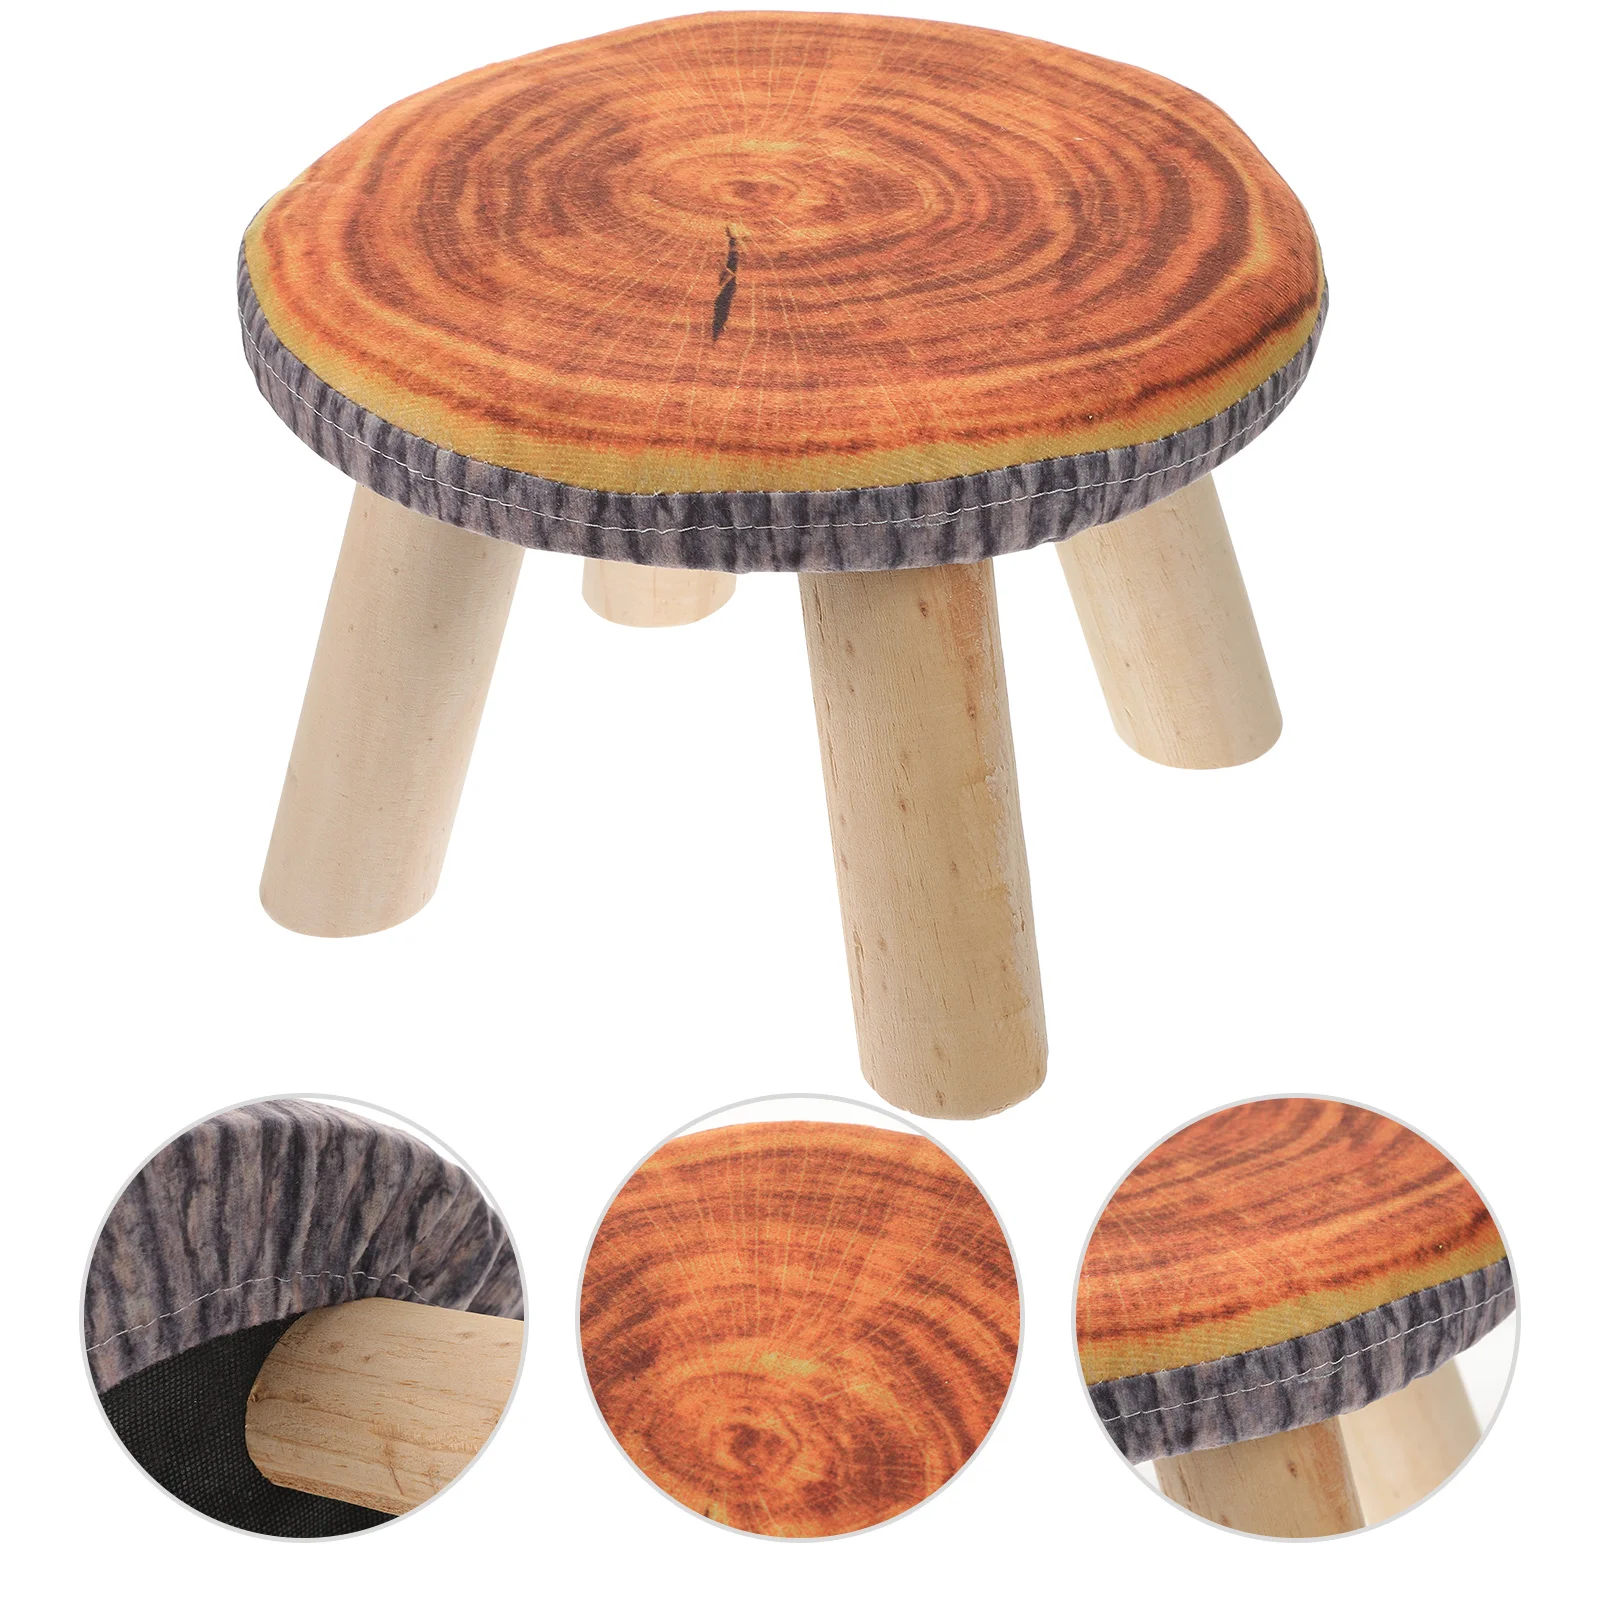 Small Bench Stool Chair Wooden Mini Toddler Stepping Kids Stools Stand Outdoor images - 6